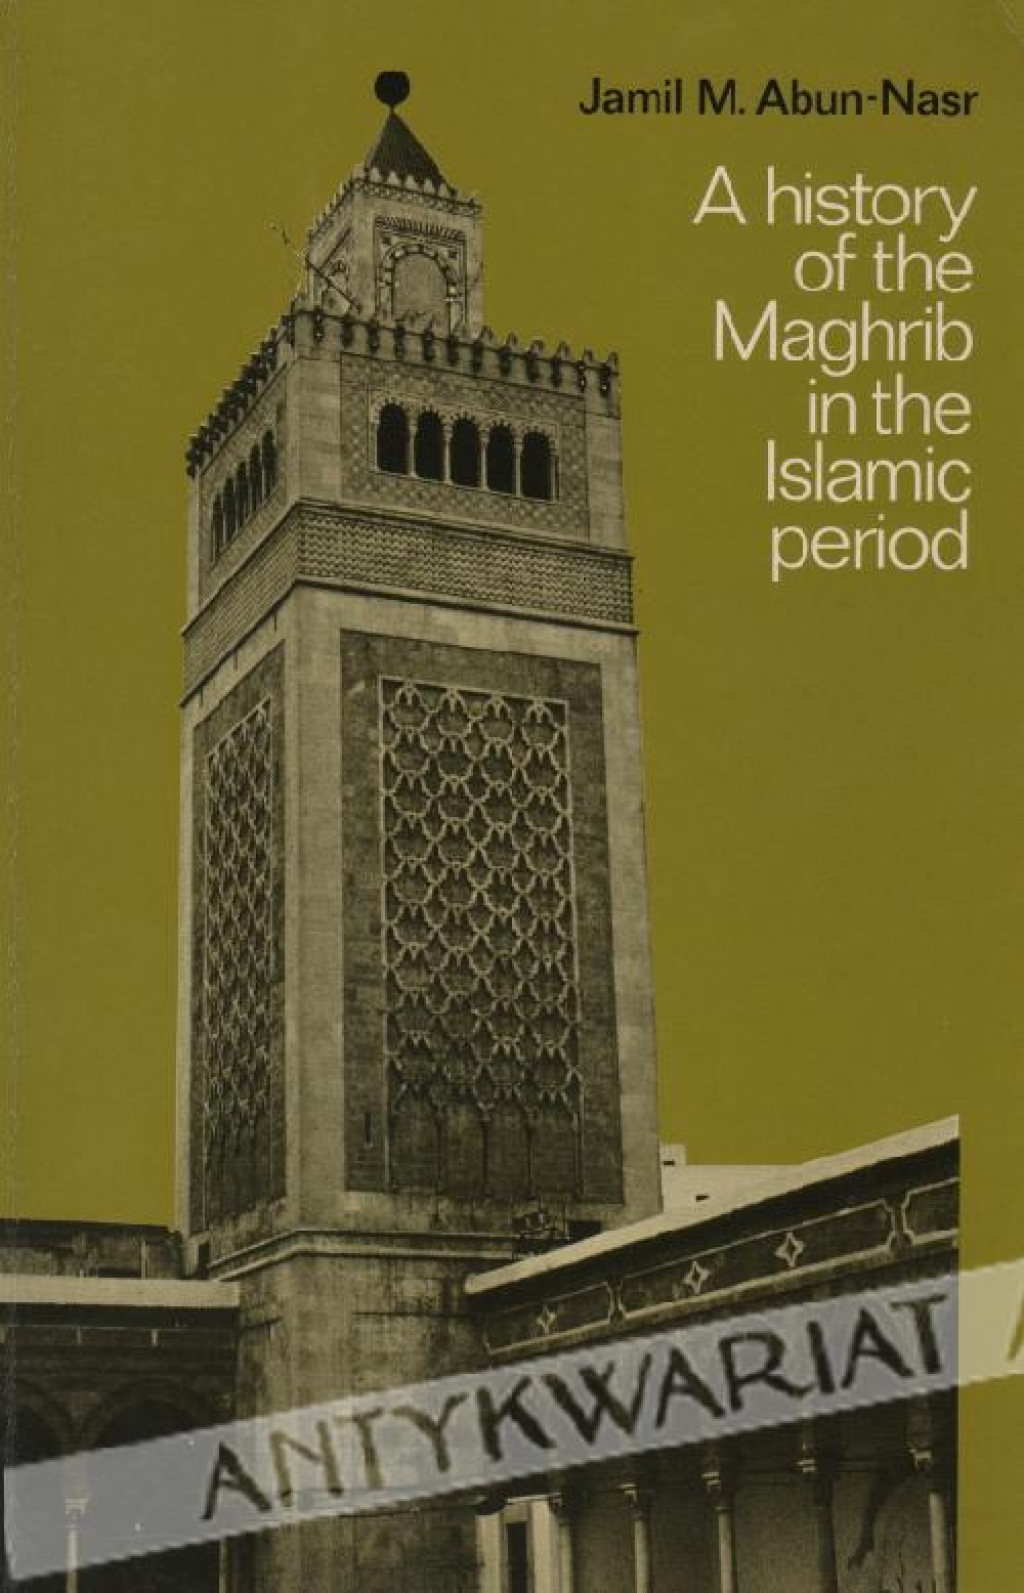 A history of the Maghrib in the Islamic period